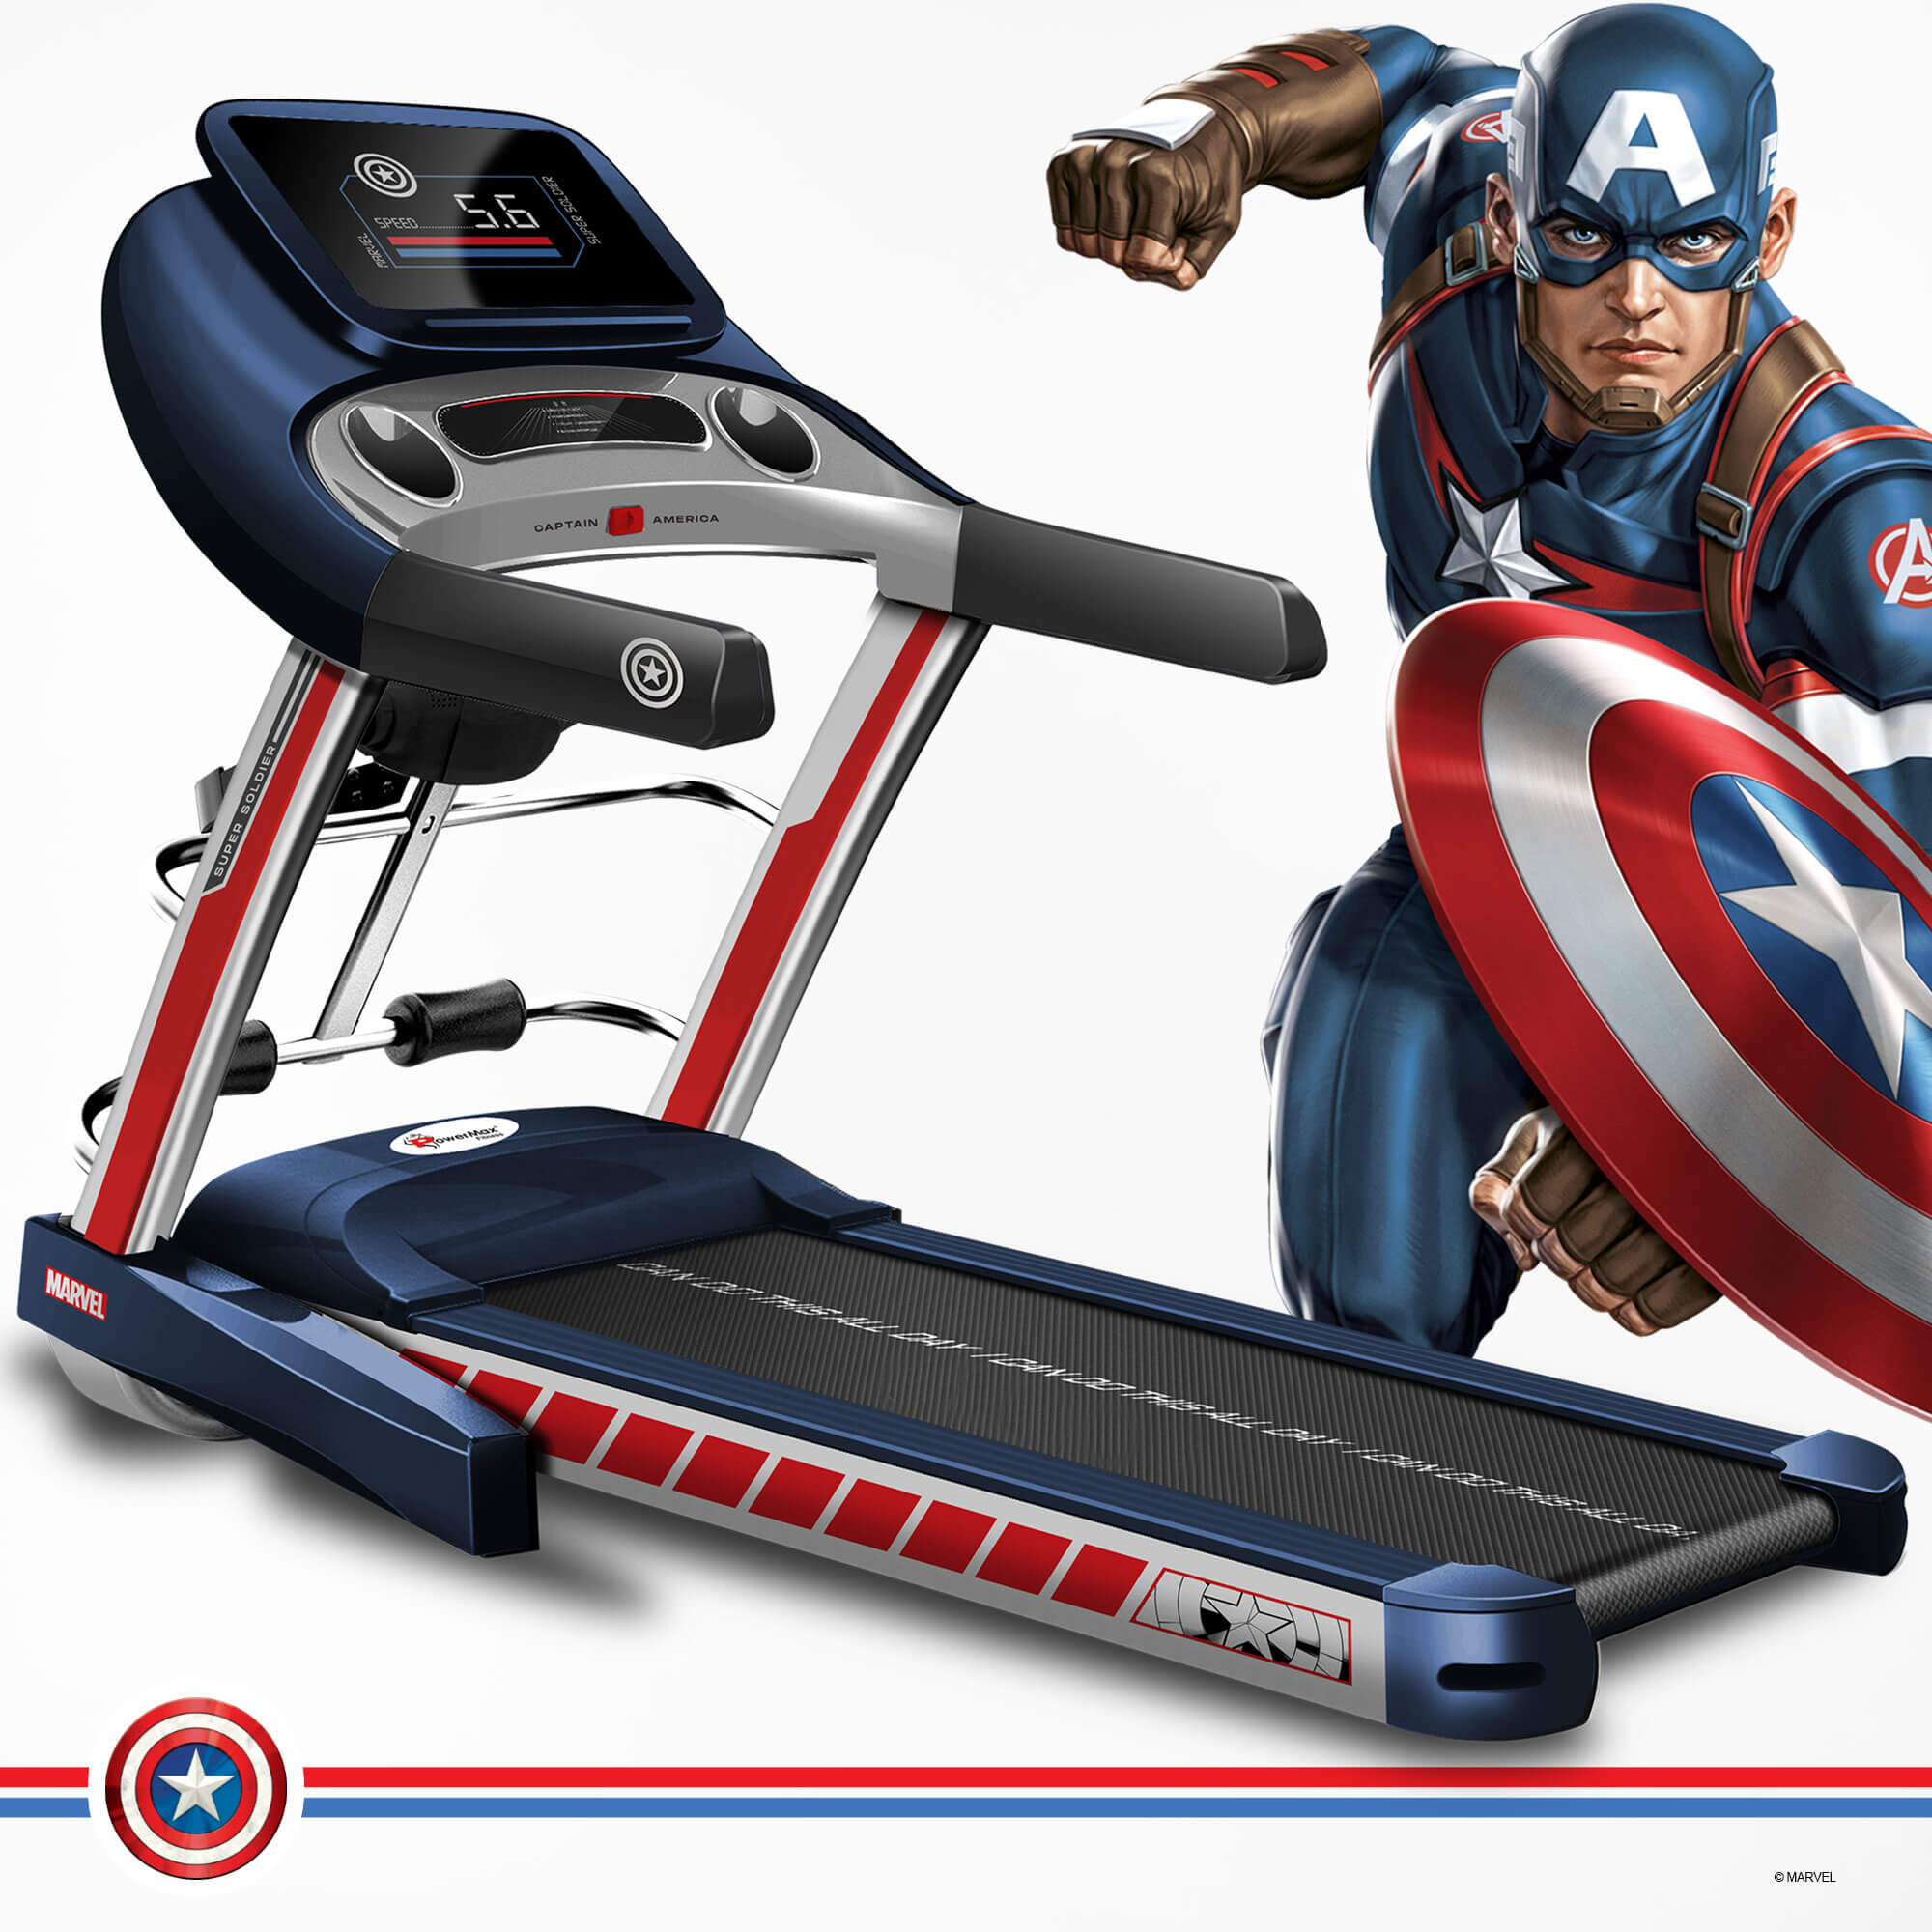 PowerMax X Marvel MT-1A/TD-A1 Motorized Treadmill with Android & iOS Application